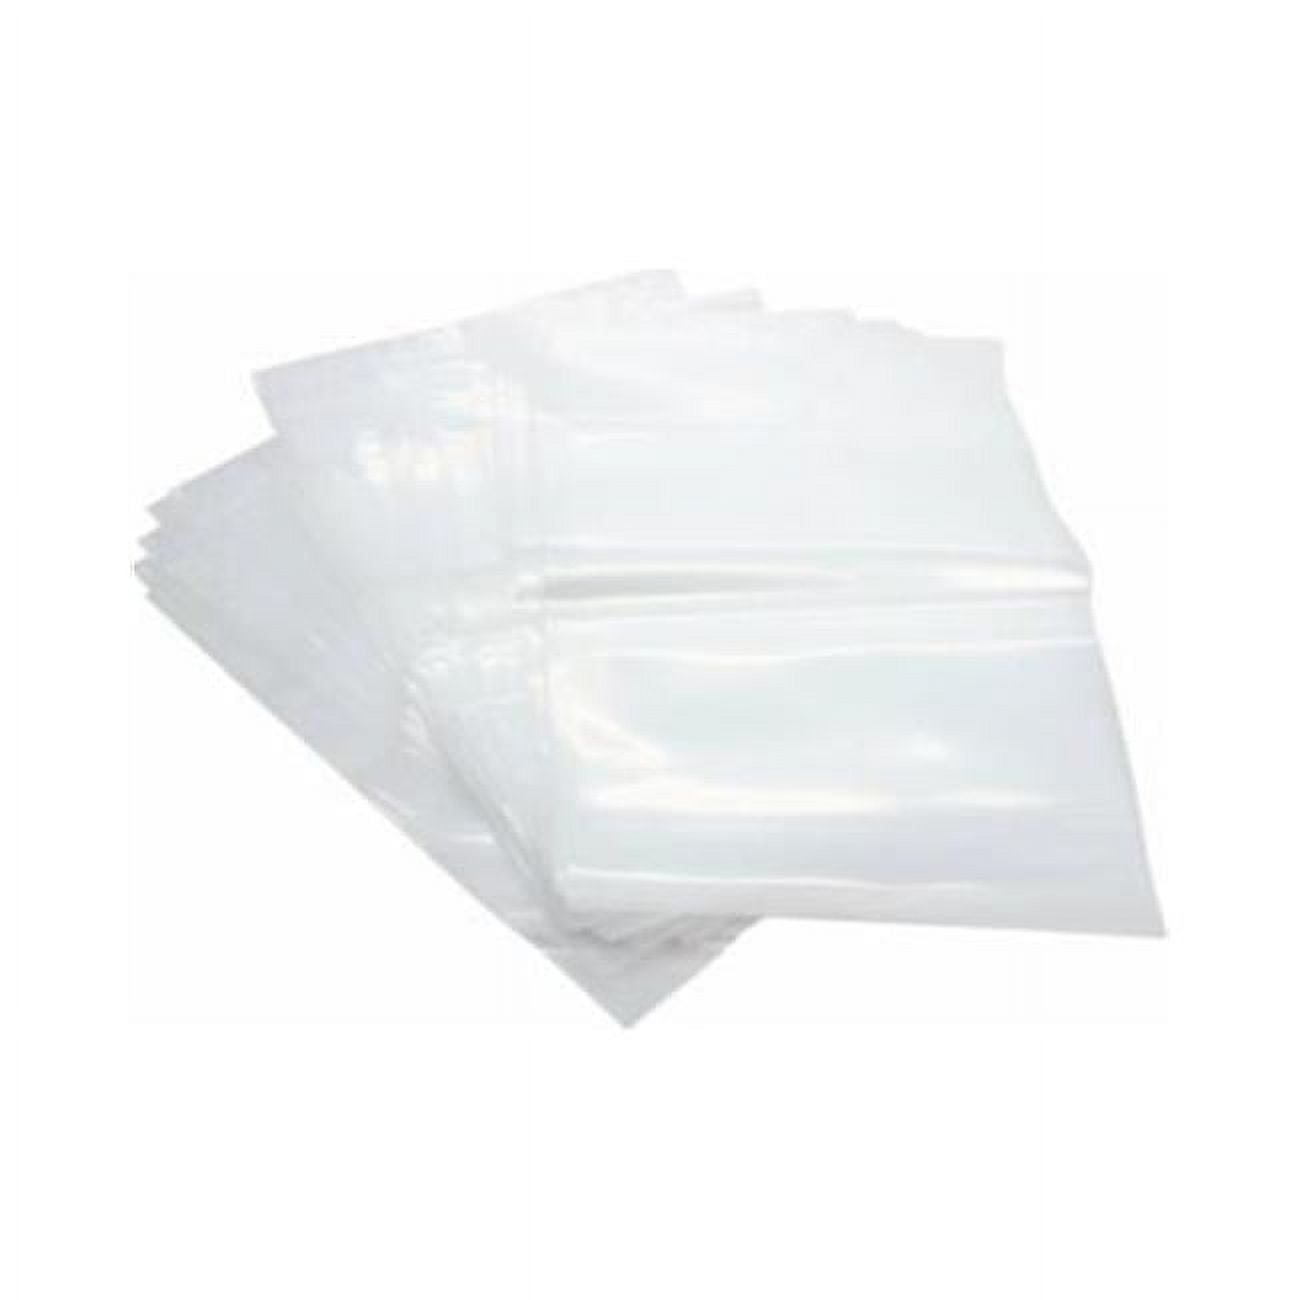 Pb4078 8 X 20 In. 2 Mil Reclosable Poly Bags, Clear